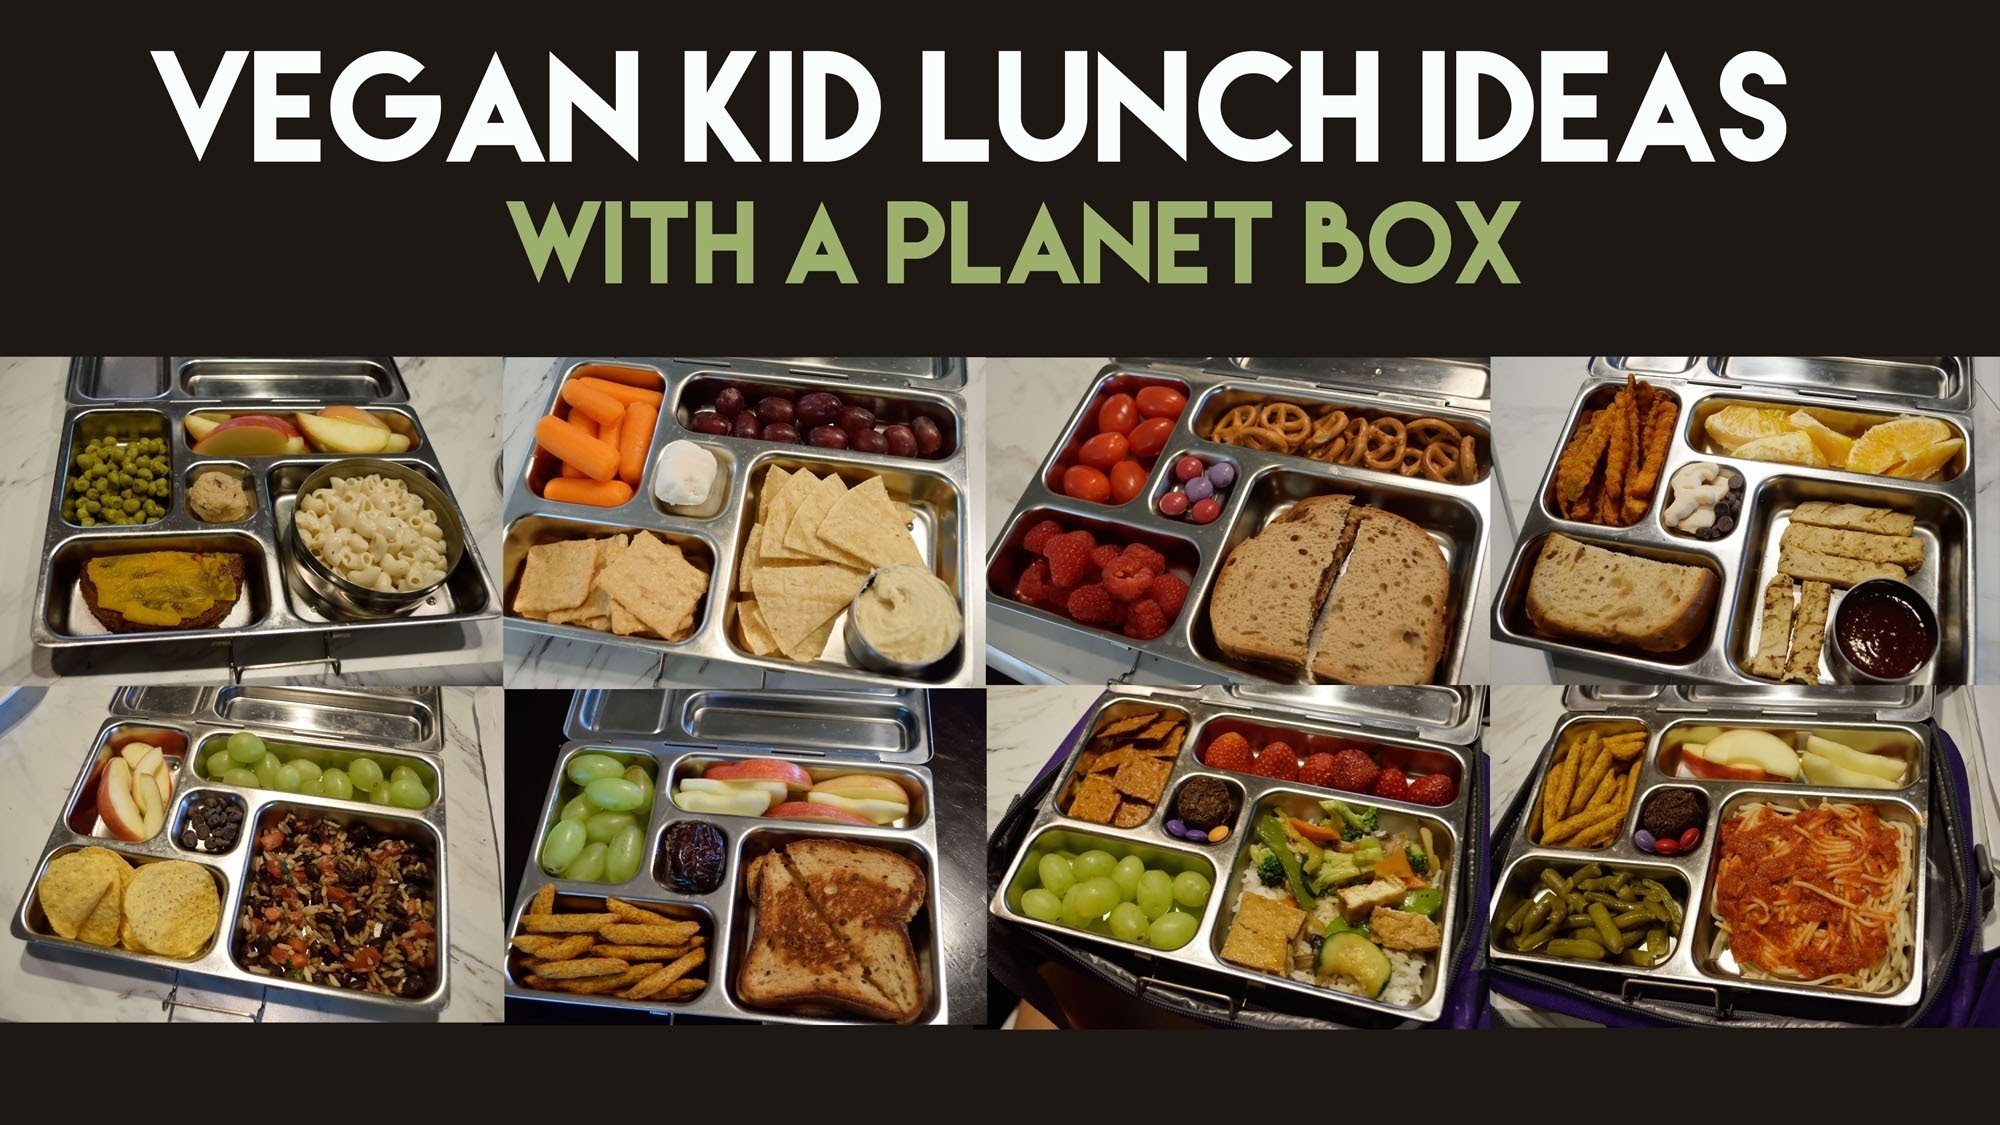 10 Fabulous Vegan Lunch Ideas For Kids 10 vegan kid lunch ideas with a planetbox youtube 2022